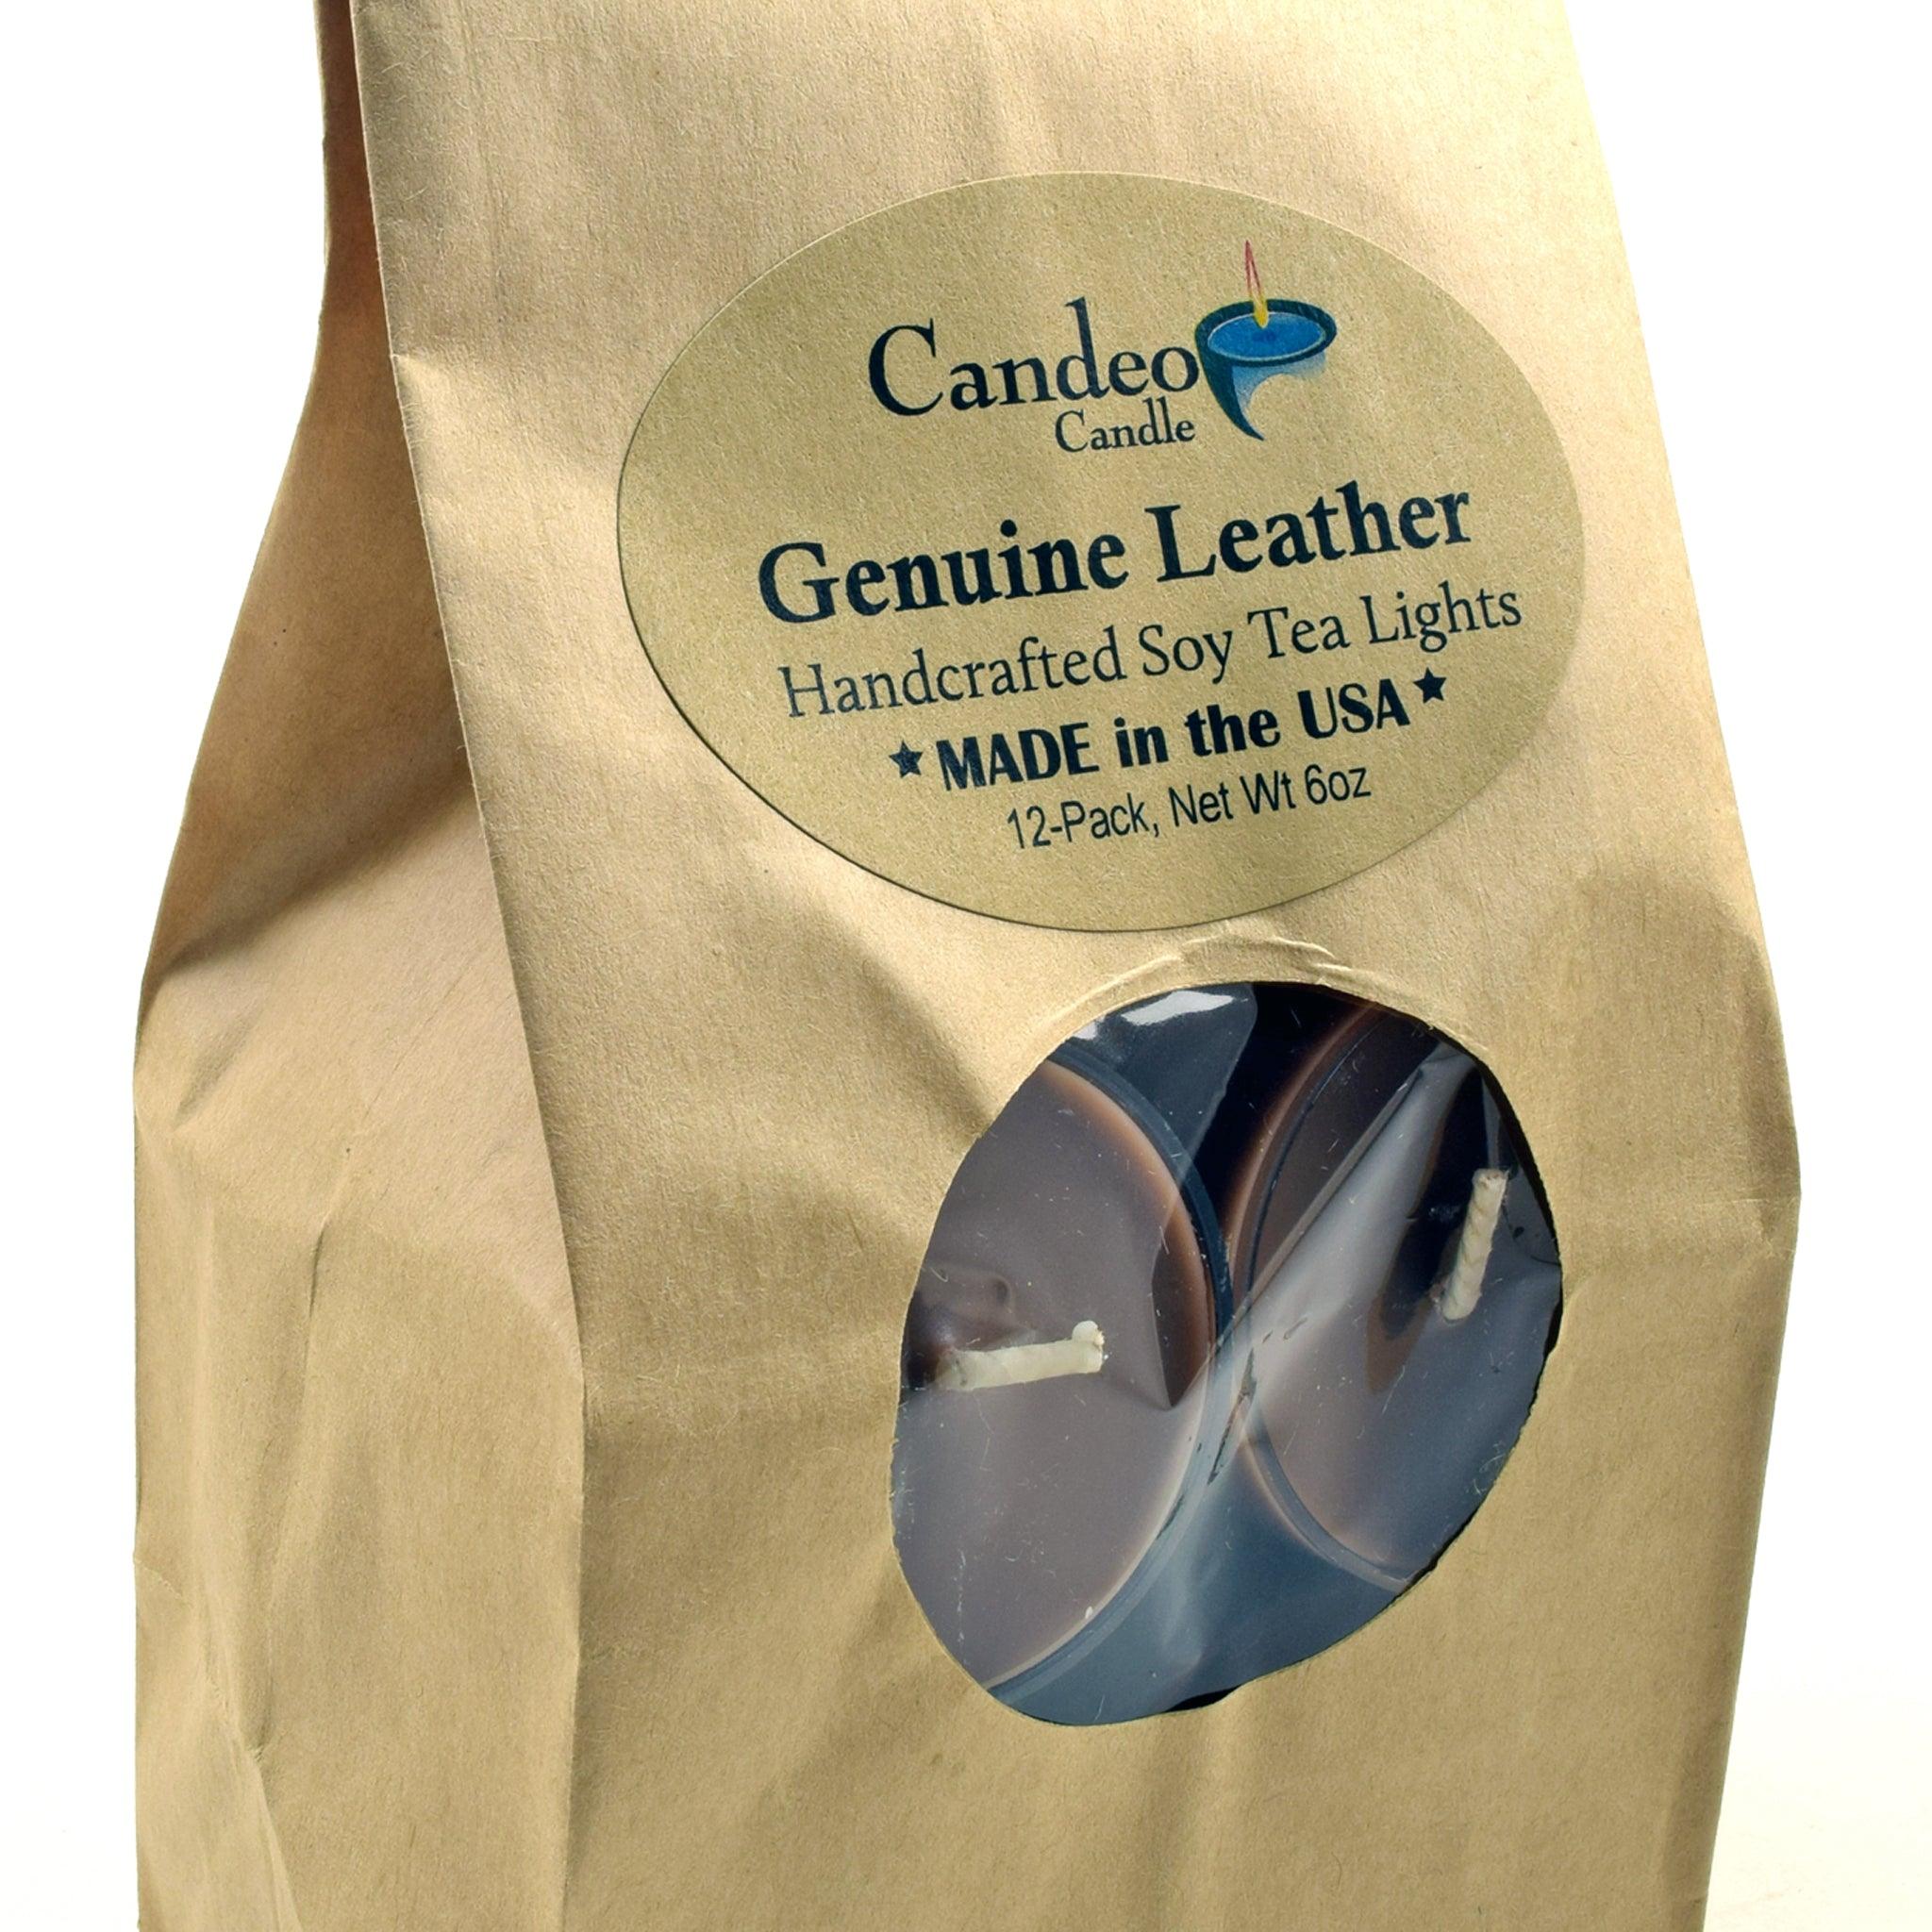 Genuine Leather, Soy Tea Light 12-Pack - Candeo Candle